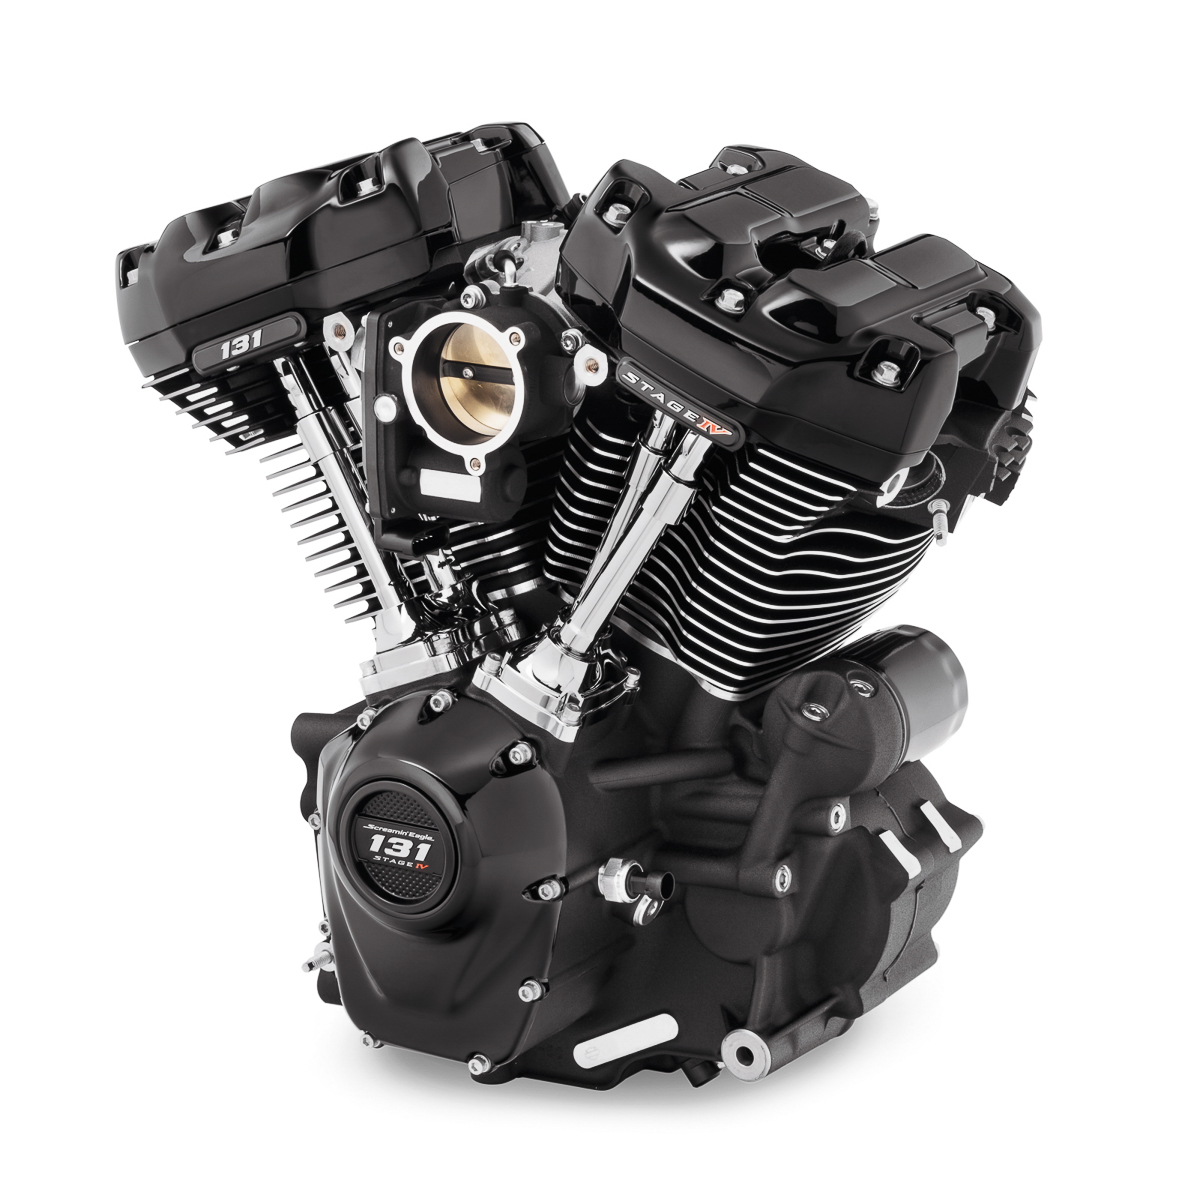 Harley Davidson Unveils 2 147cc Engine Motorcycle News Motorcycle Reviews From Malaysia Asia And The World Bikesrepublic Com